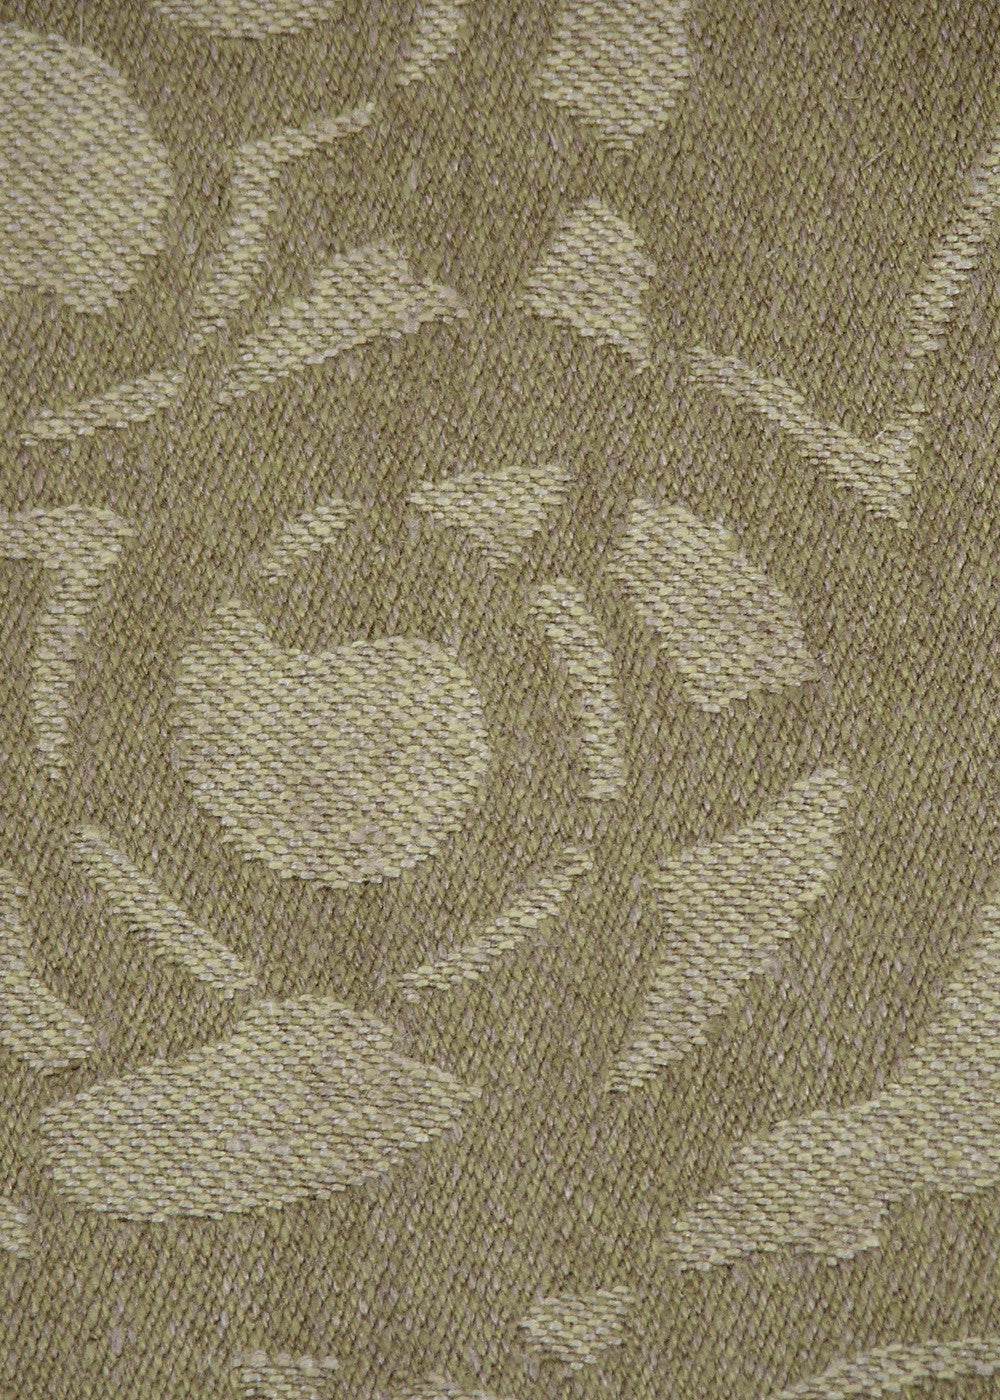 cream and natural fabric with a woven large-scale damask pattern